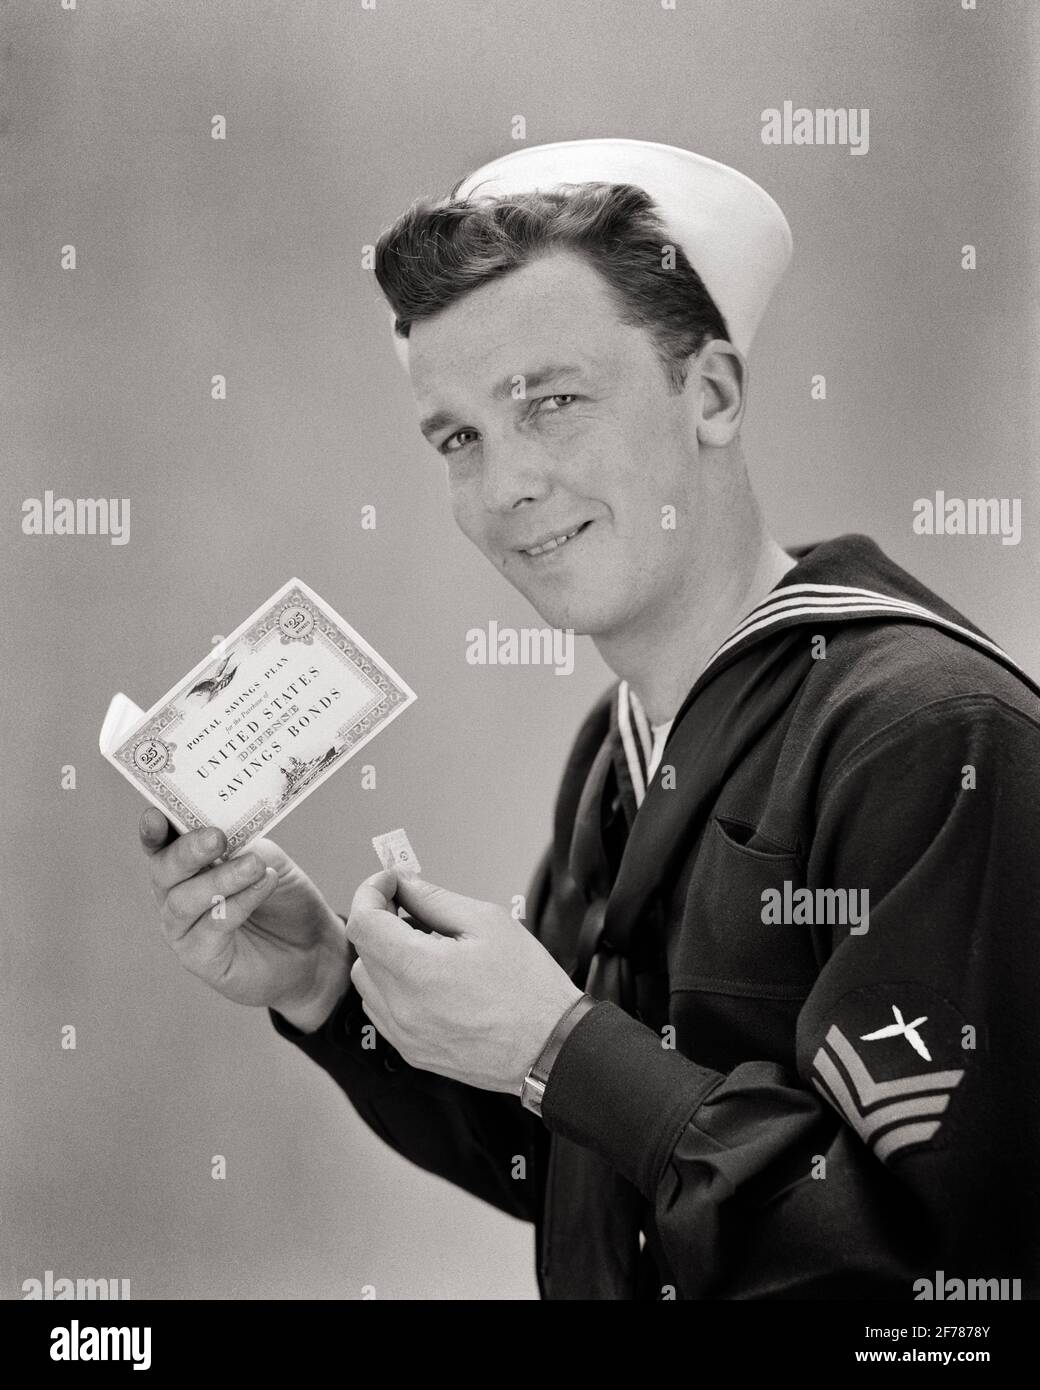 1940s SMILING NAVY SAILOR LOOKING AT CAMERA HOLDING WORLD WAR 2 UNITED STATES SAVINGS BOND POSTAL PLAN BOOKLET AND STAMP  - d1634 HAR001 HARS STUDIO SHOT NAVY UNITED STATES COPY SPACE HALF-LENGTH PERSONS POSTAL UNITED STATES OF AMERICA MALES FORCE B&W BOND NORTH AMERICA EYE CONTACT FREEDOM GOALS NORTH AMERICAN CHEERFUL NAVAL AND WORLD WARS WORLD WAR WORLD WAR TWO WORLD WAR II SMILES UNIFORMS FORCES BOOKLET JOYFUL NAVIES PATRIOTIC WORLD WAR 2 USN YOUNG ADULT MAN BLACK AND WHITE CAUCASIAN ETHNICITY HAR001 OLD FASHIONED Stock Photo